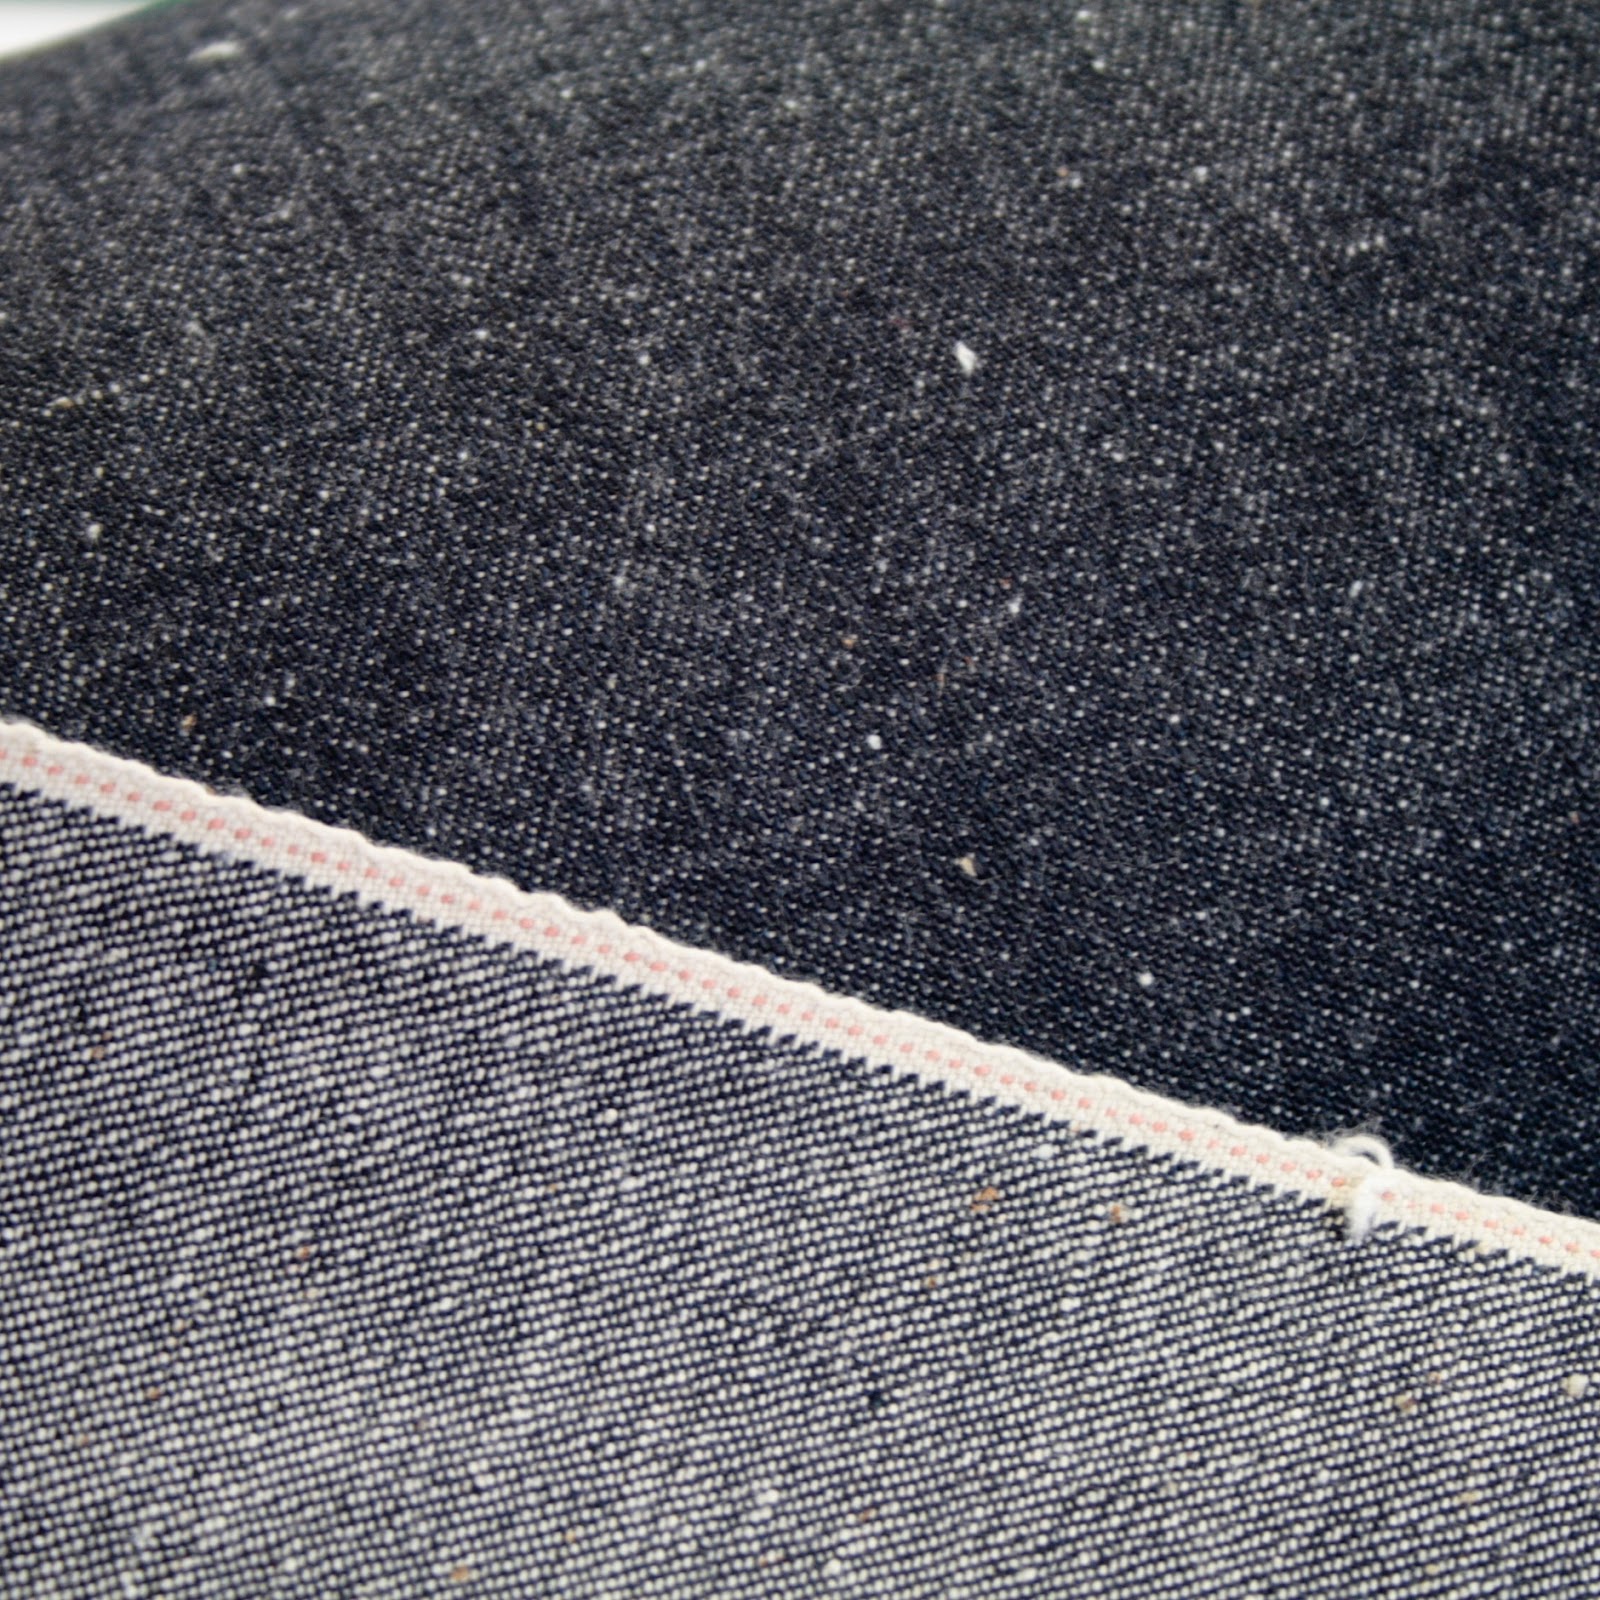 Amazon.com: ad fabric, Cotton dinem Japanese Selvedge Denim, Indigo Color,  Fabric by The Yard Width: 30 inches : Arts, Crafts & Sewing